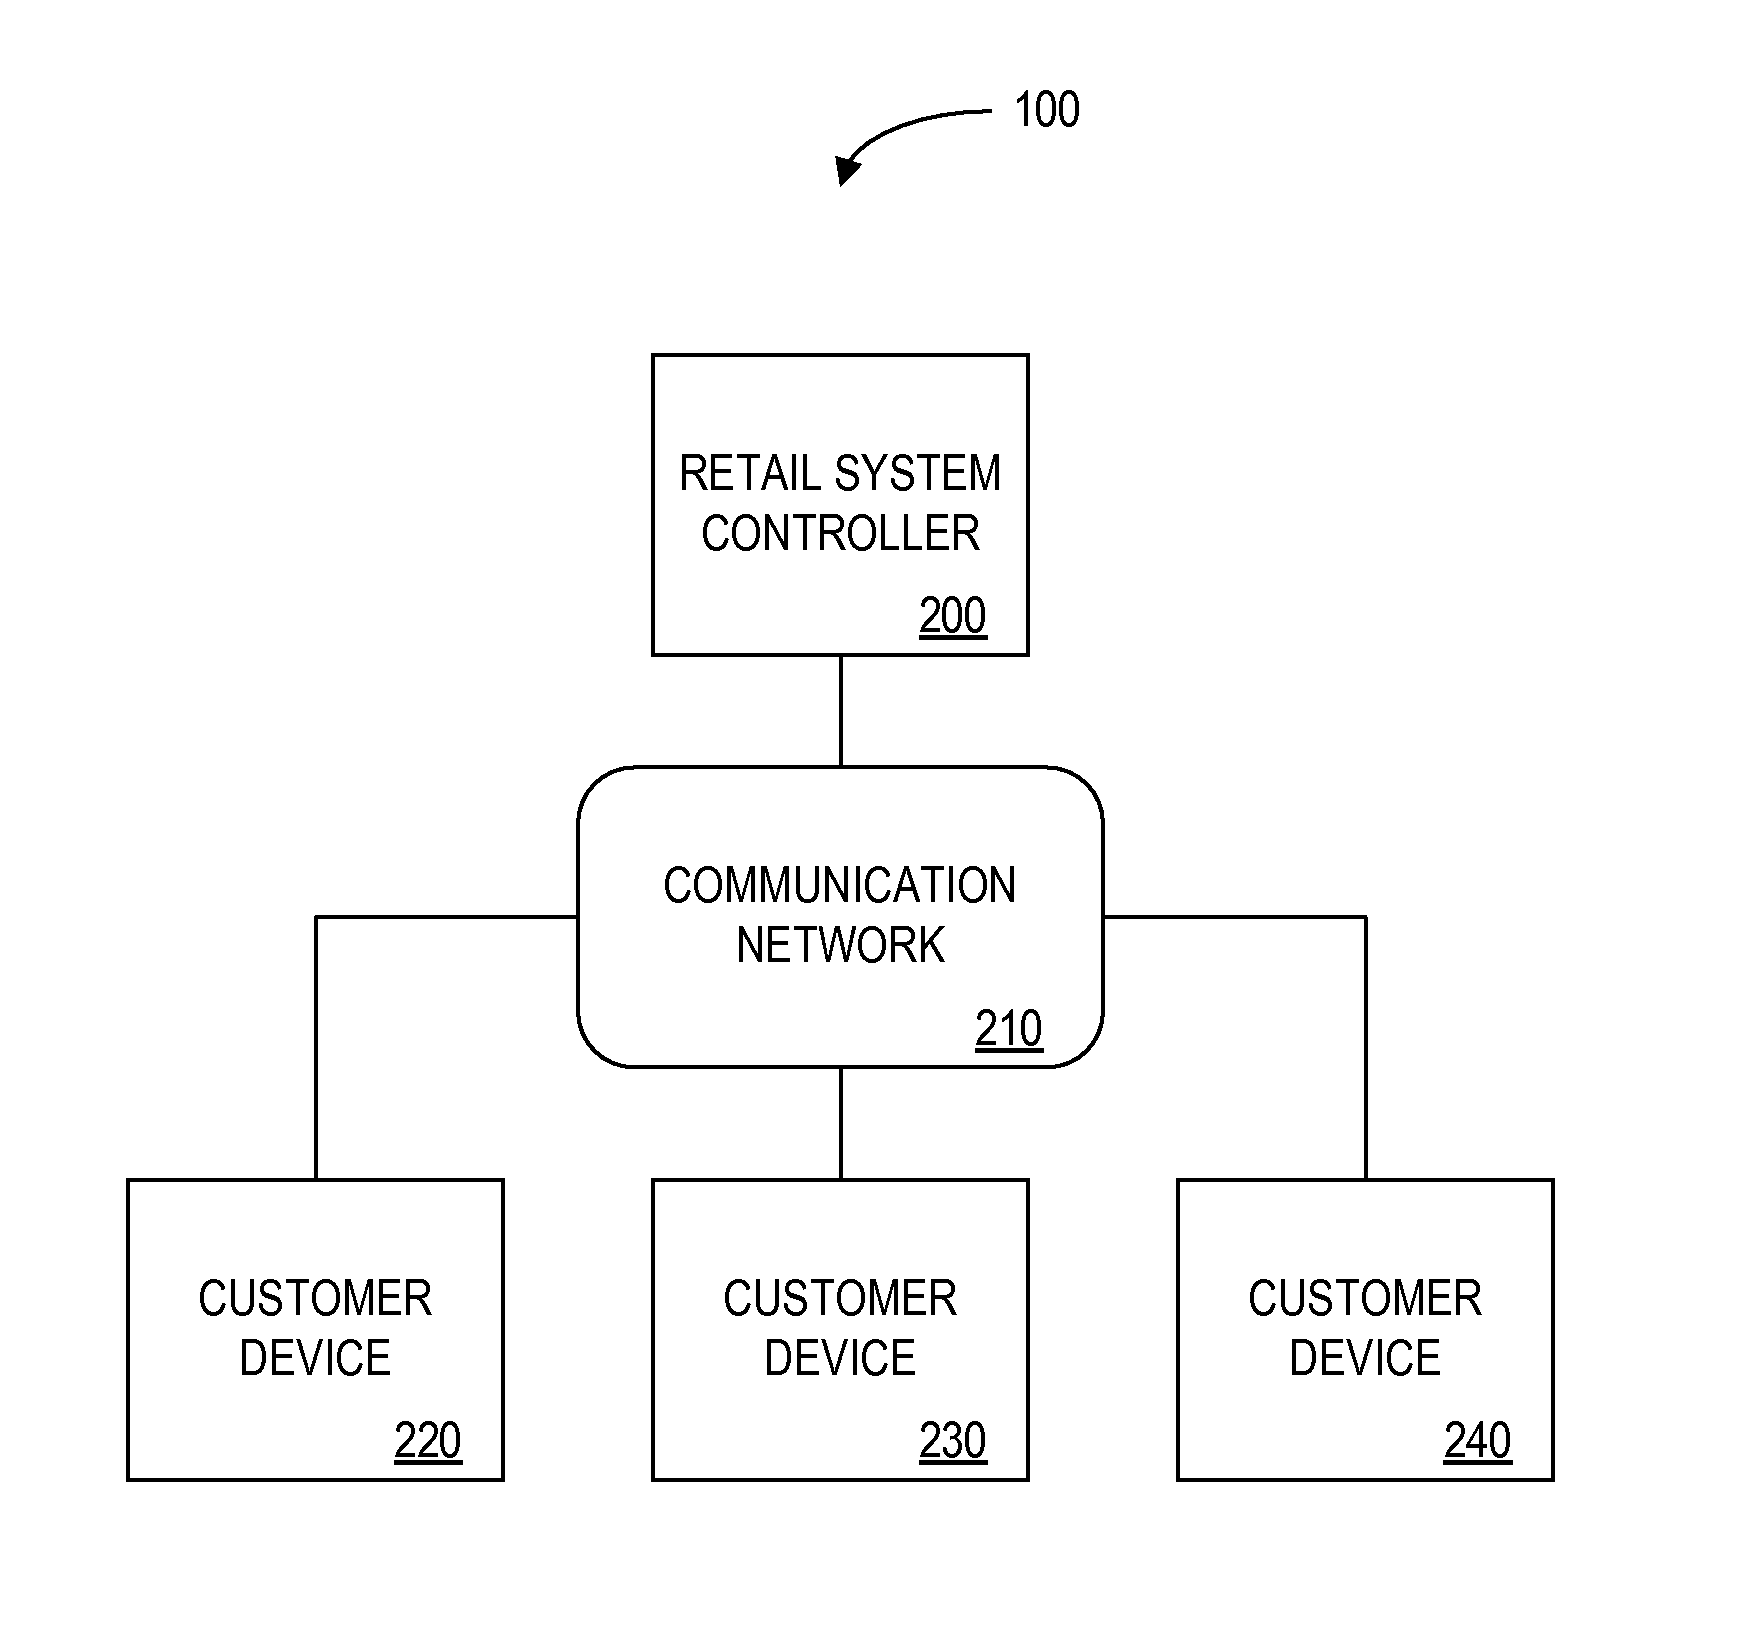 Retail system for selling products based on a flexible product description